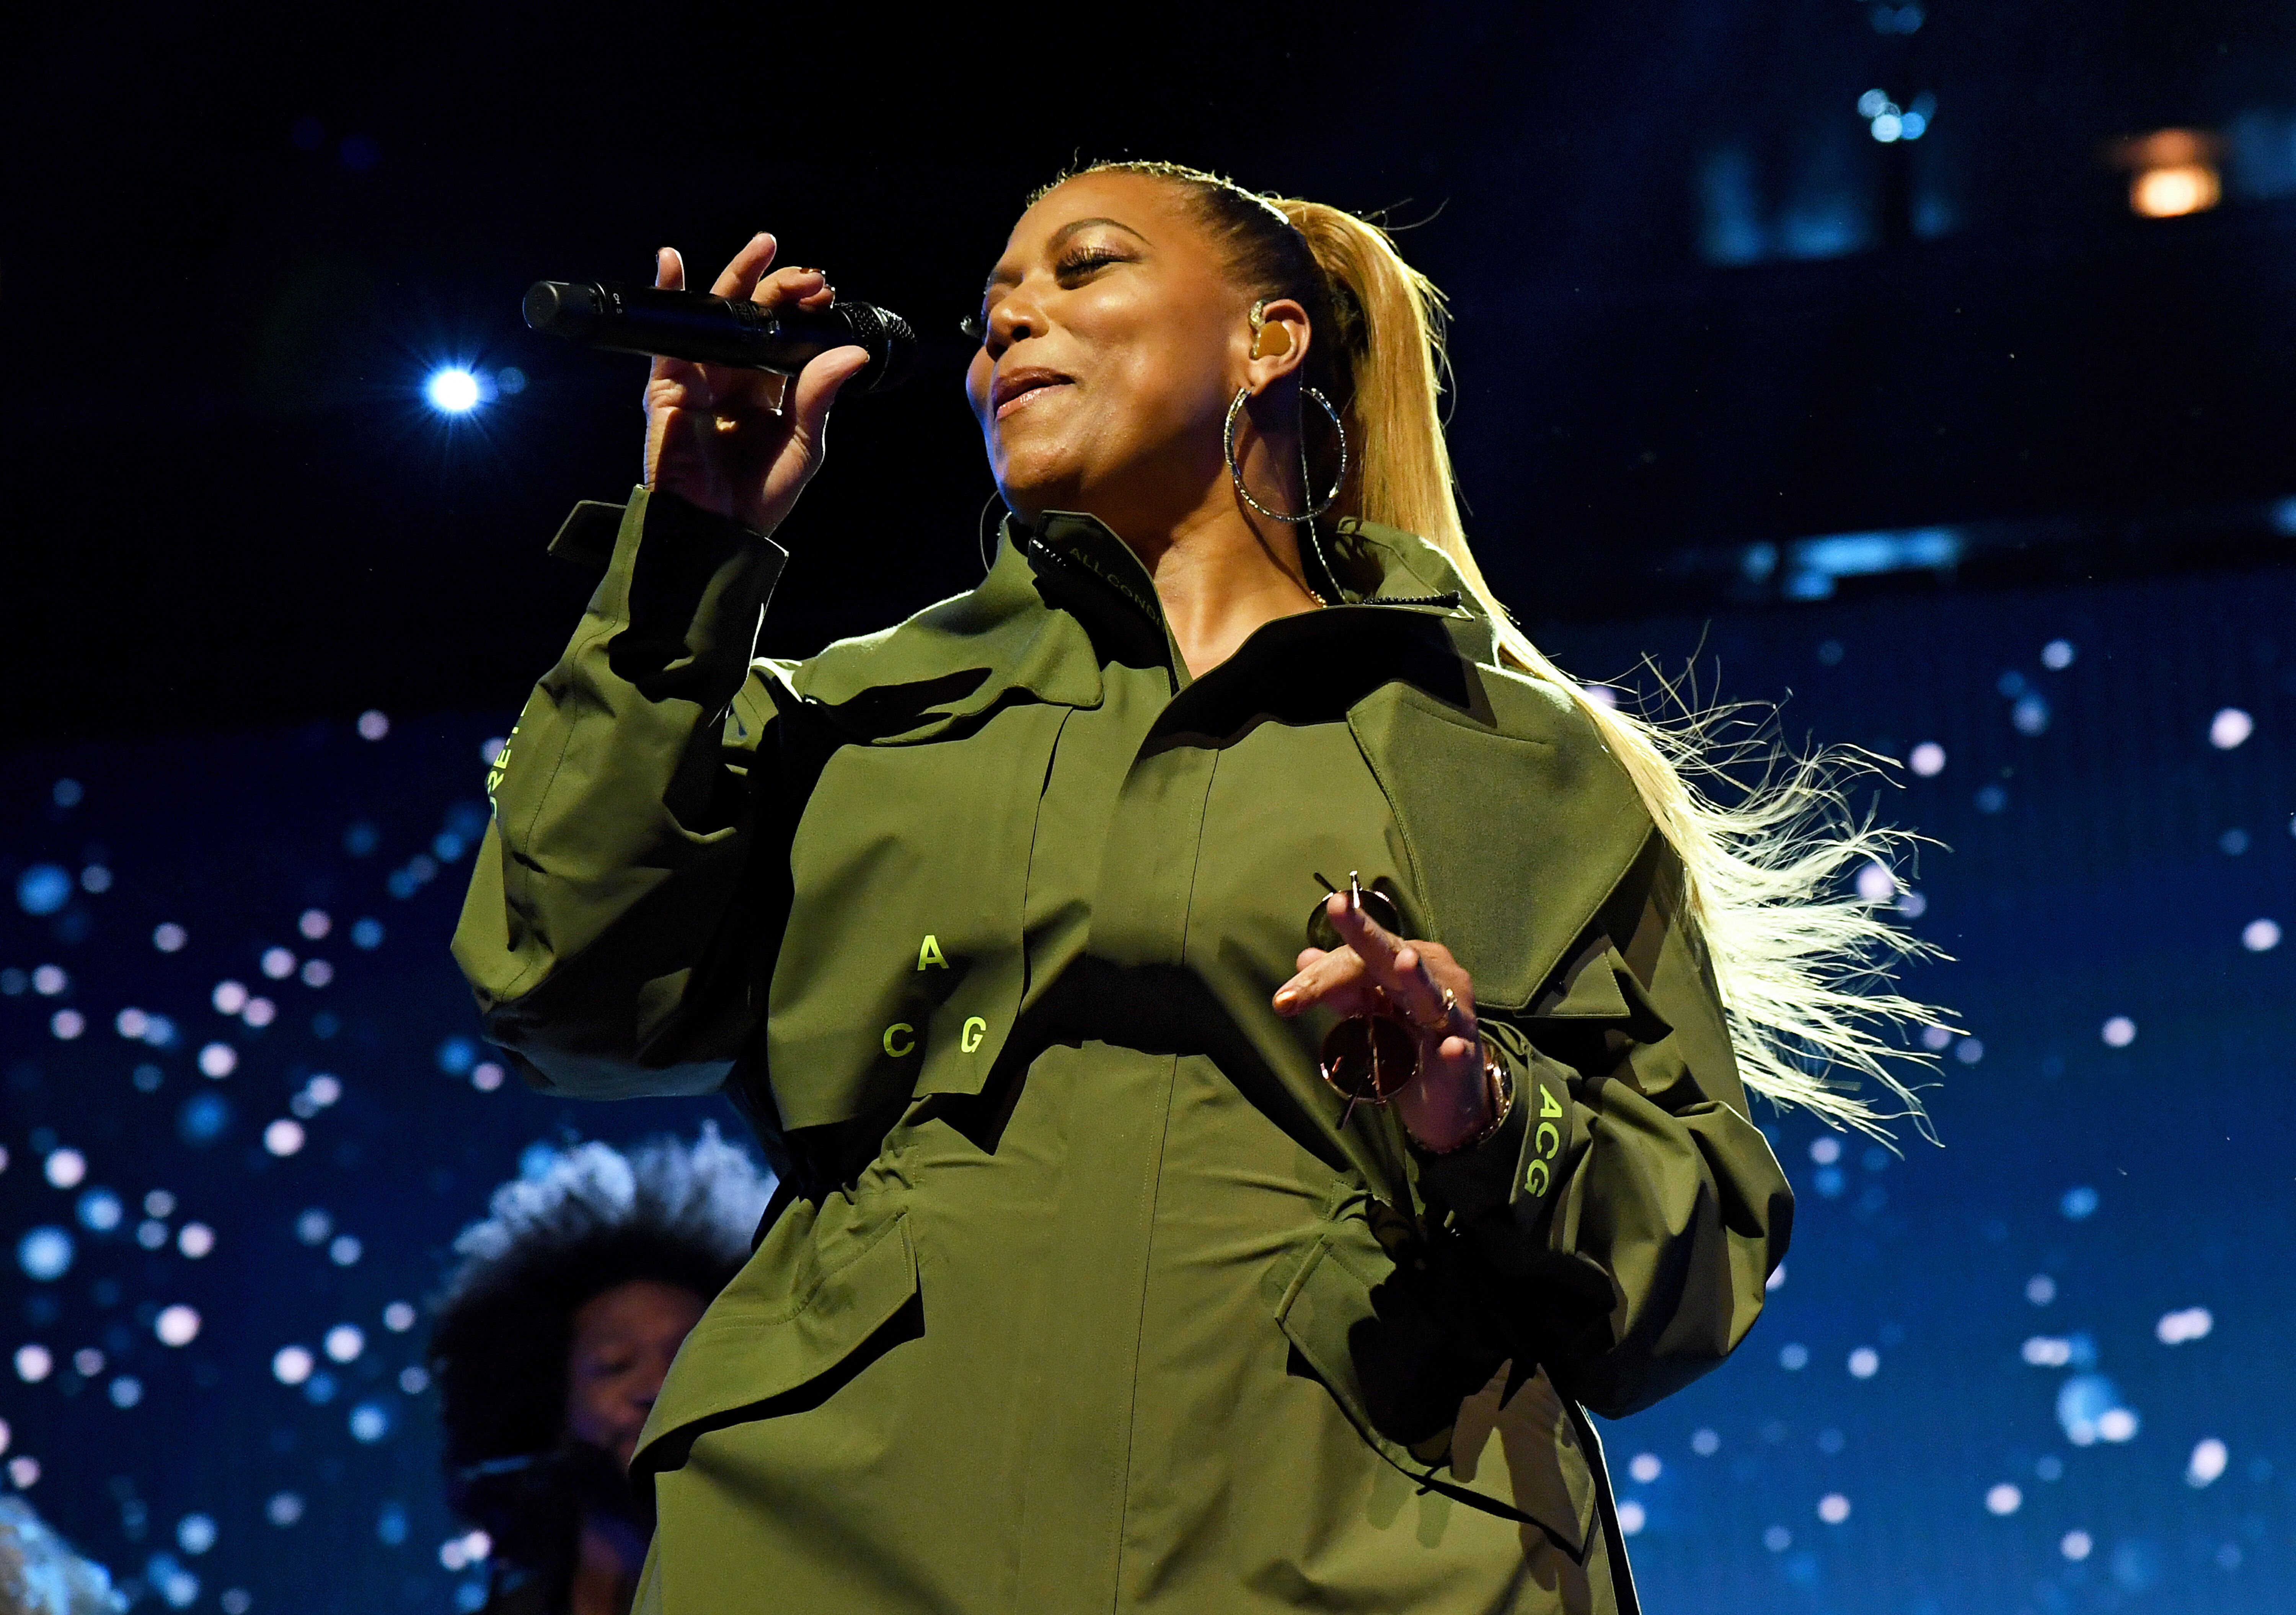 Queen Latifah performs in Chicago during the 2020 State Farm All-Star Saturday Night at United Center on Feb.15, 2020. (Kevin Mazur via Getty Images)